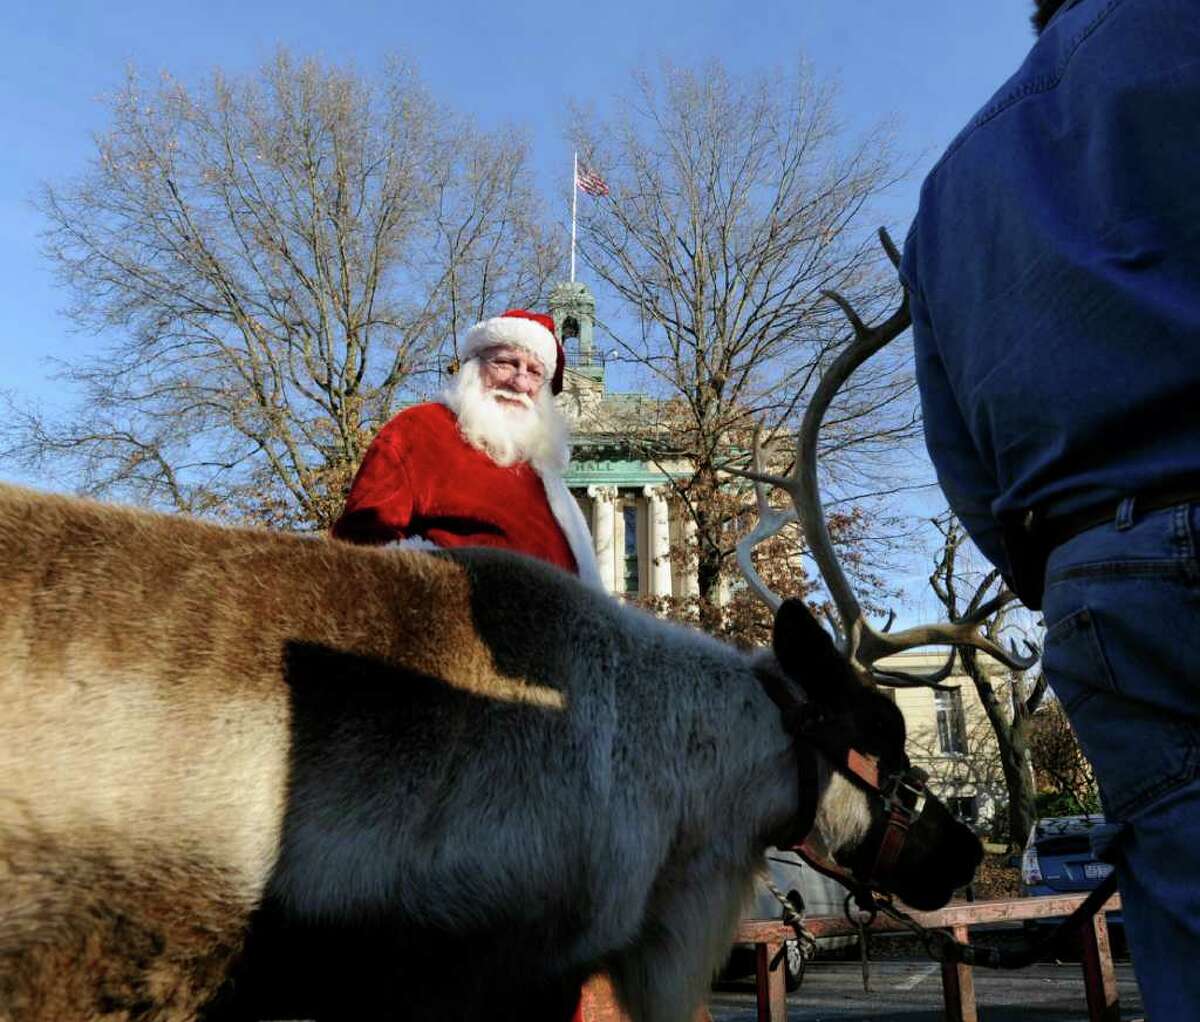 Check out the annual Greenwich Reindeer Festival Friday, Saturday and Sunday. Meet Santa and live reindeer. The festival runs through December 24. Find out more.